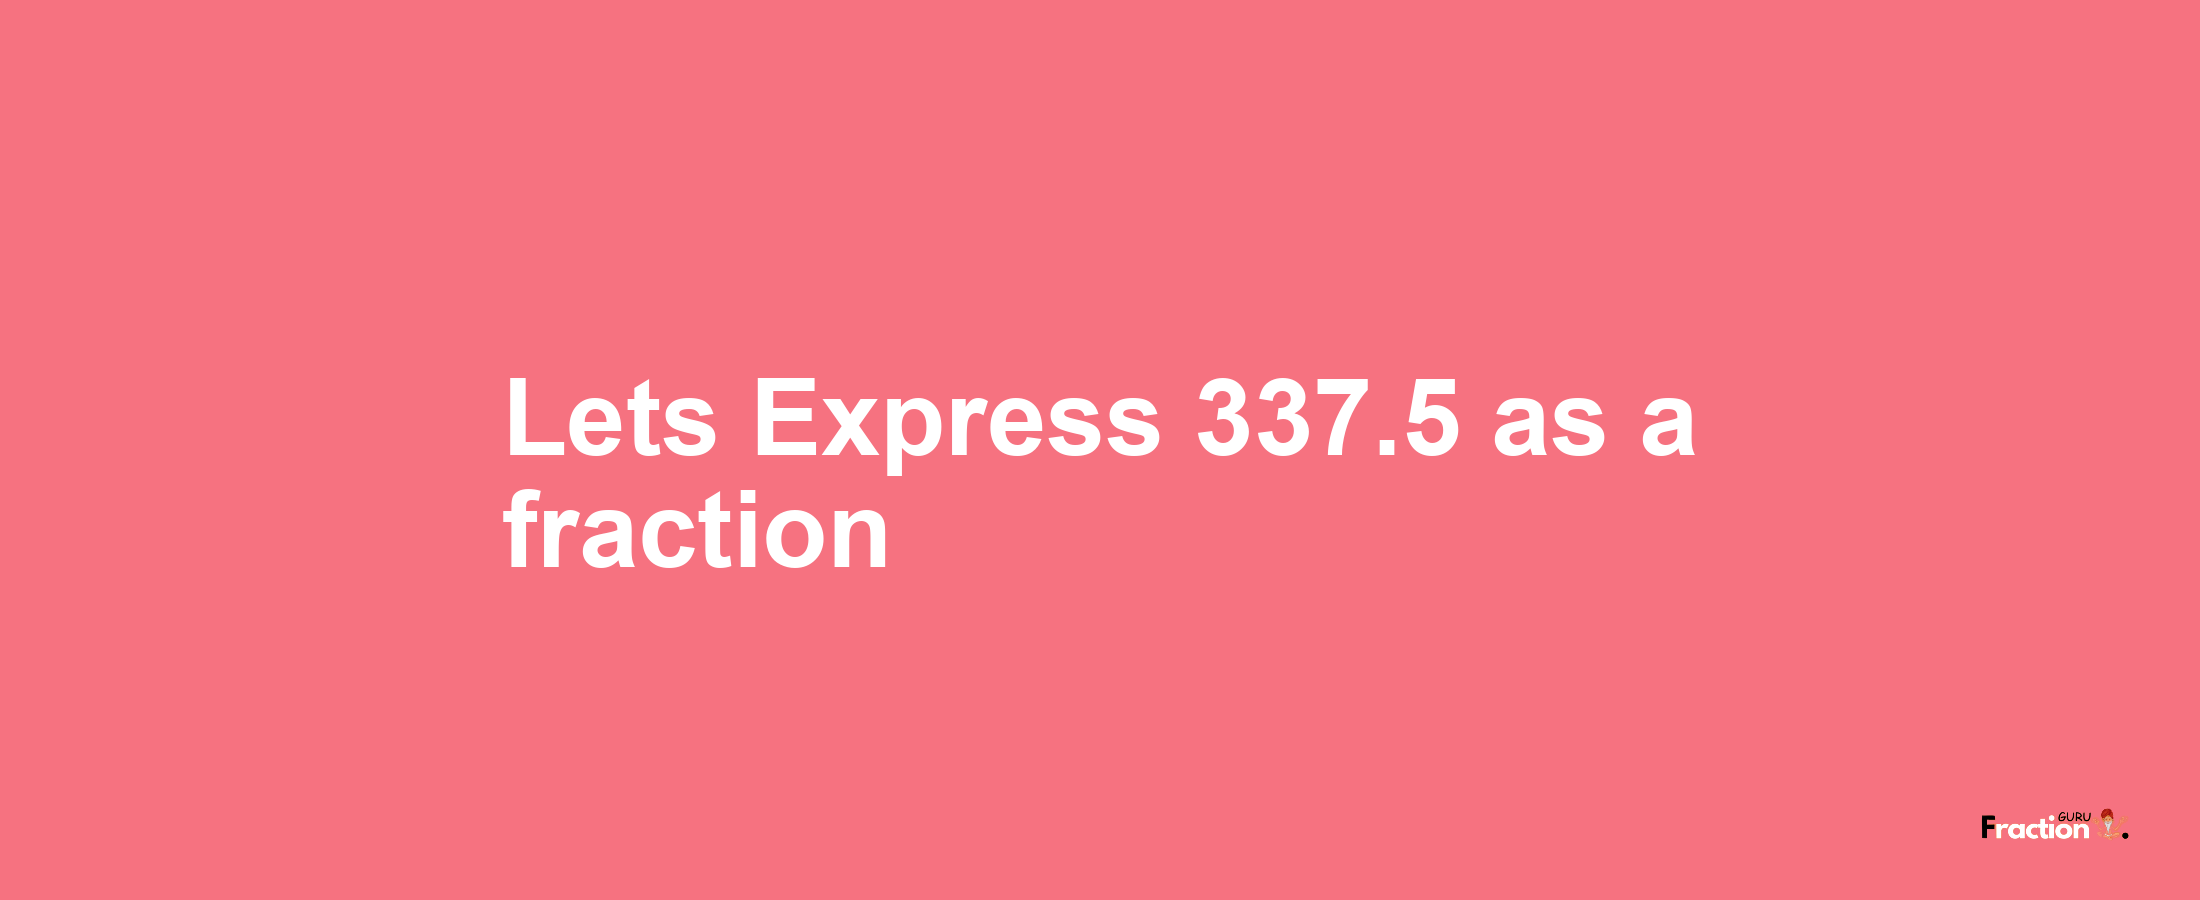 Lets Express 337.5 as afraction